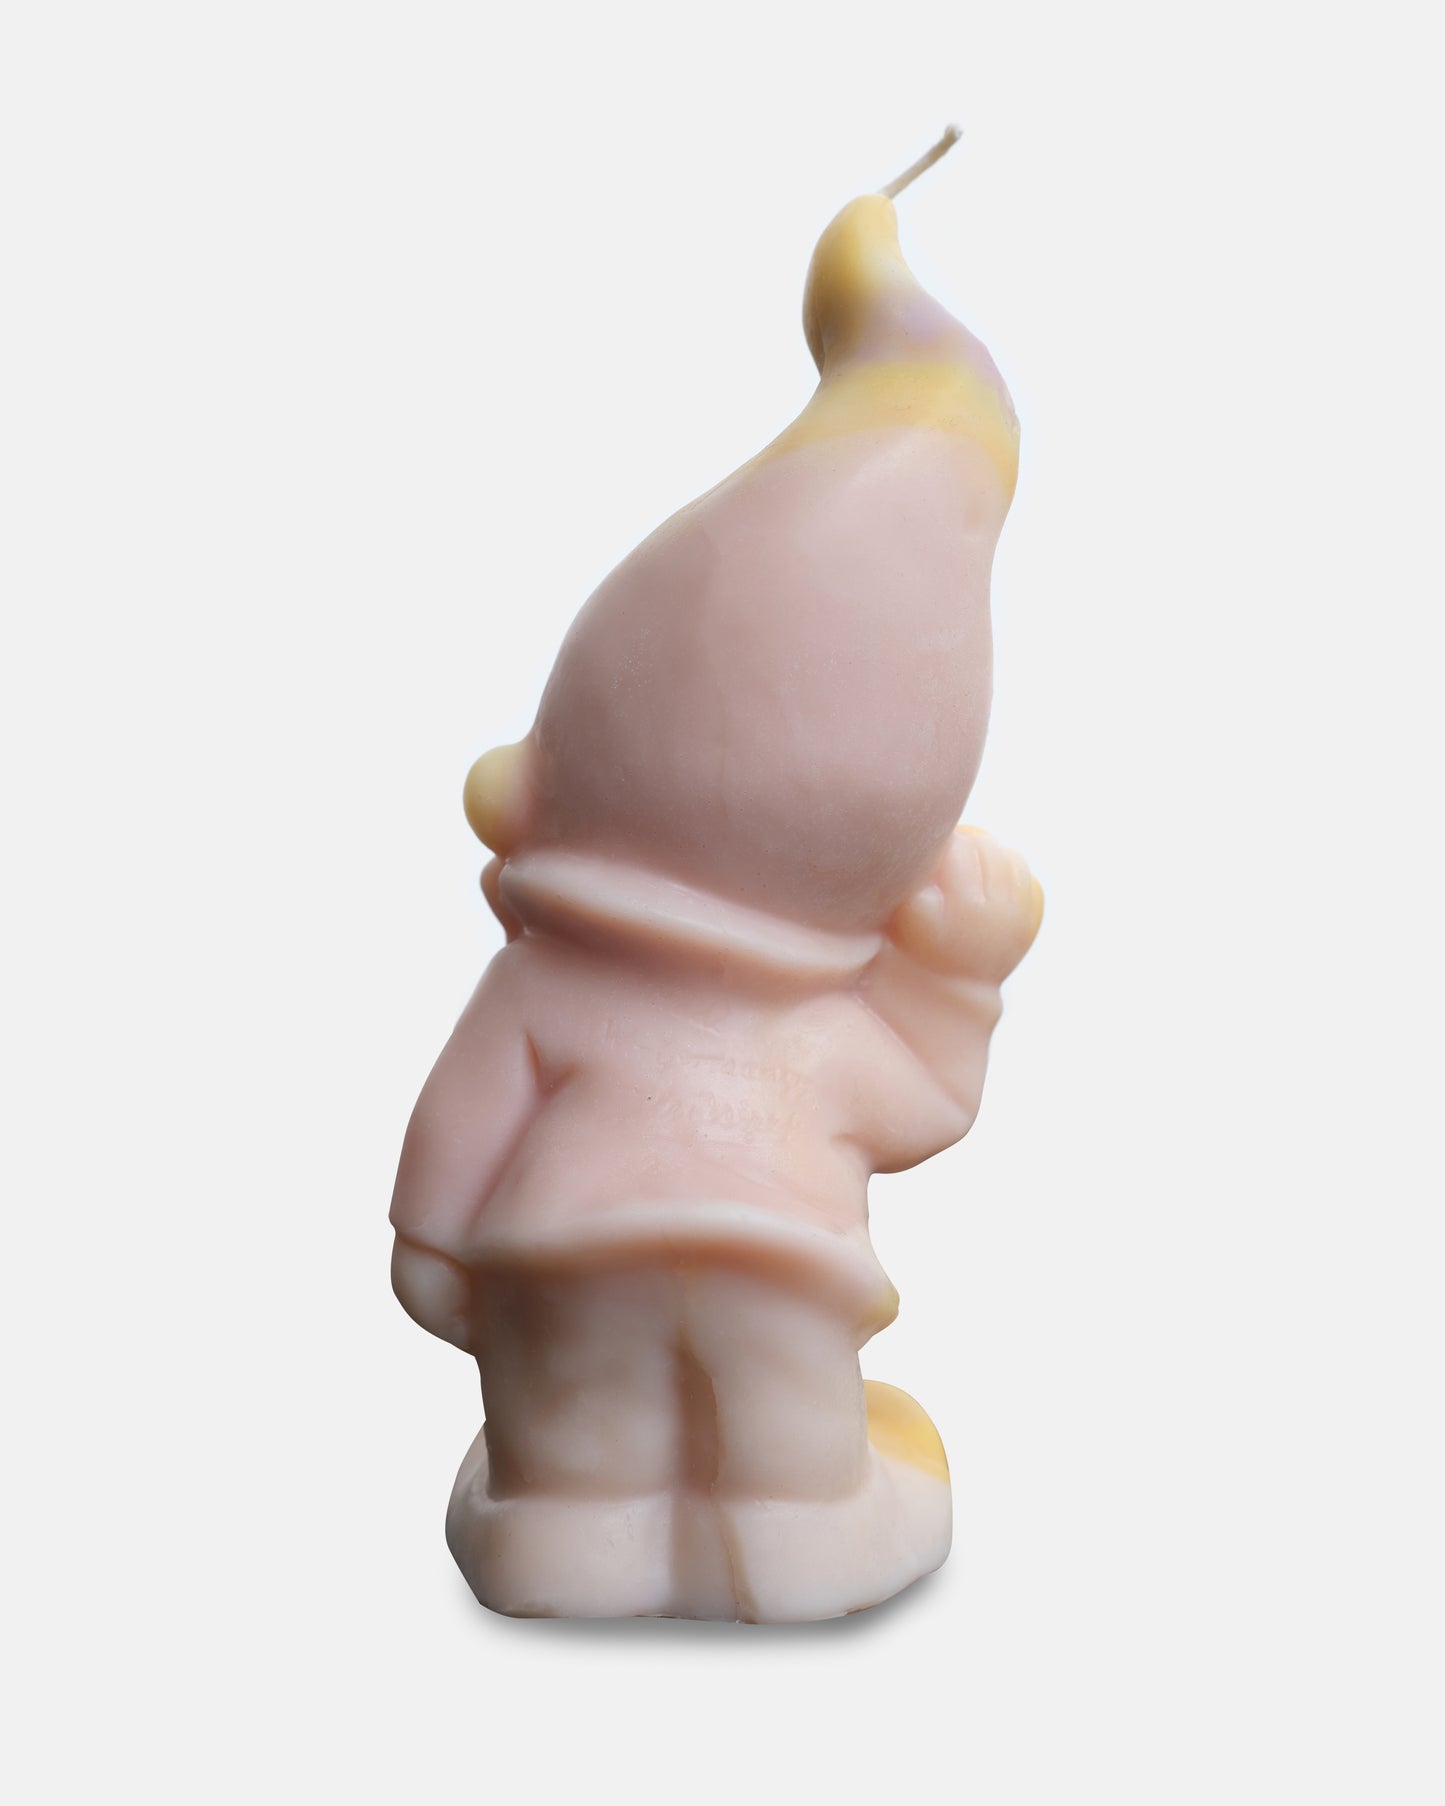 Gnome Candle